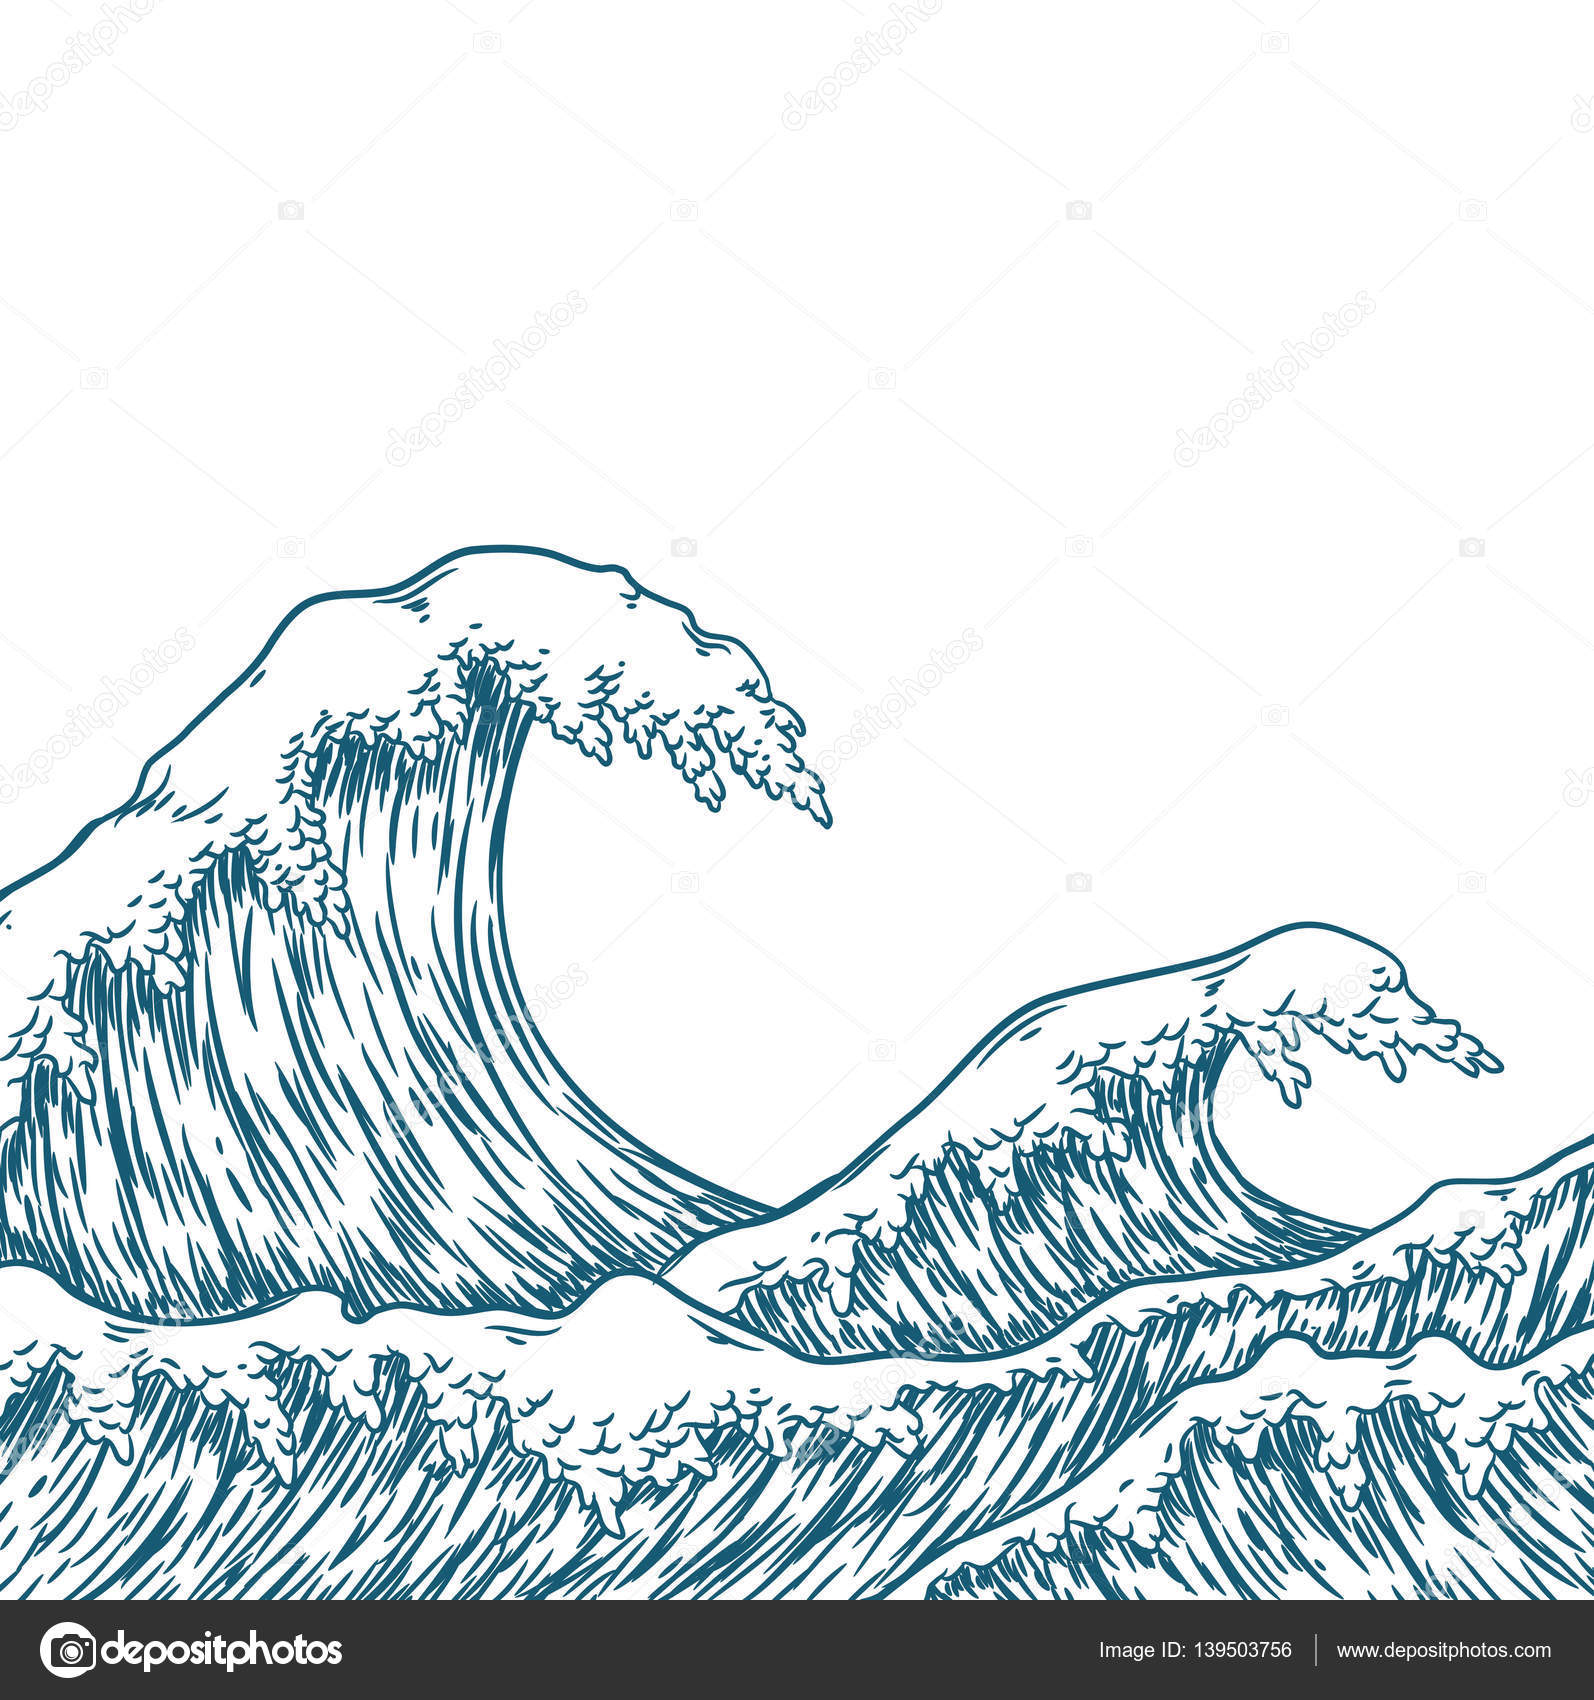 Amazing How To Draw Ocean Waves of the decade Learn more here 